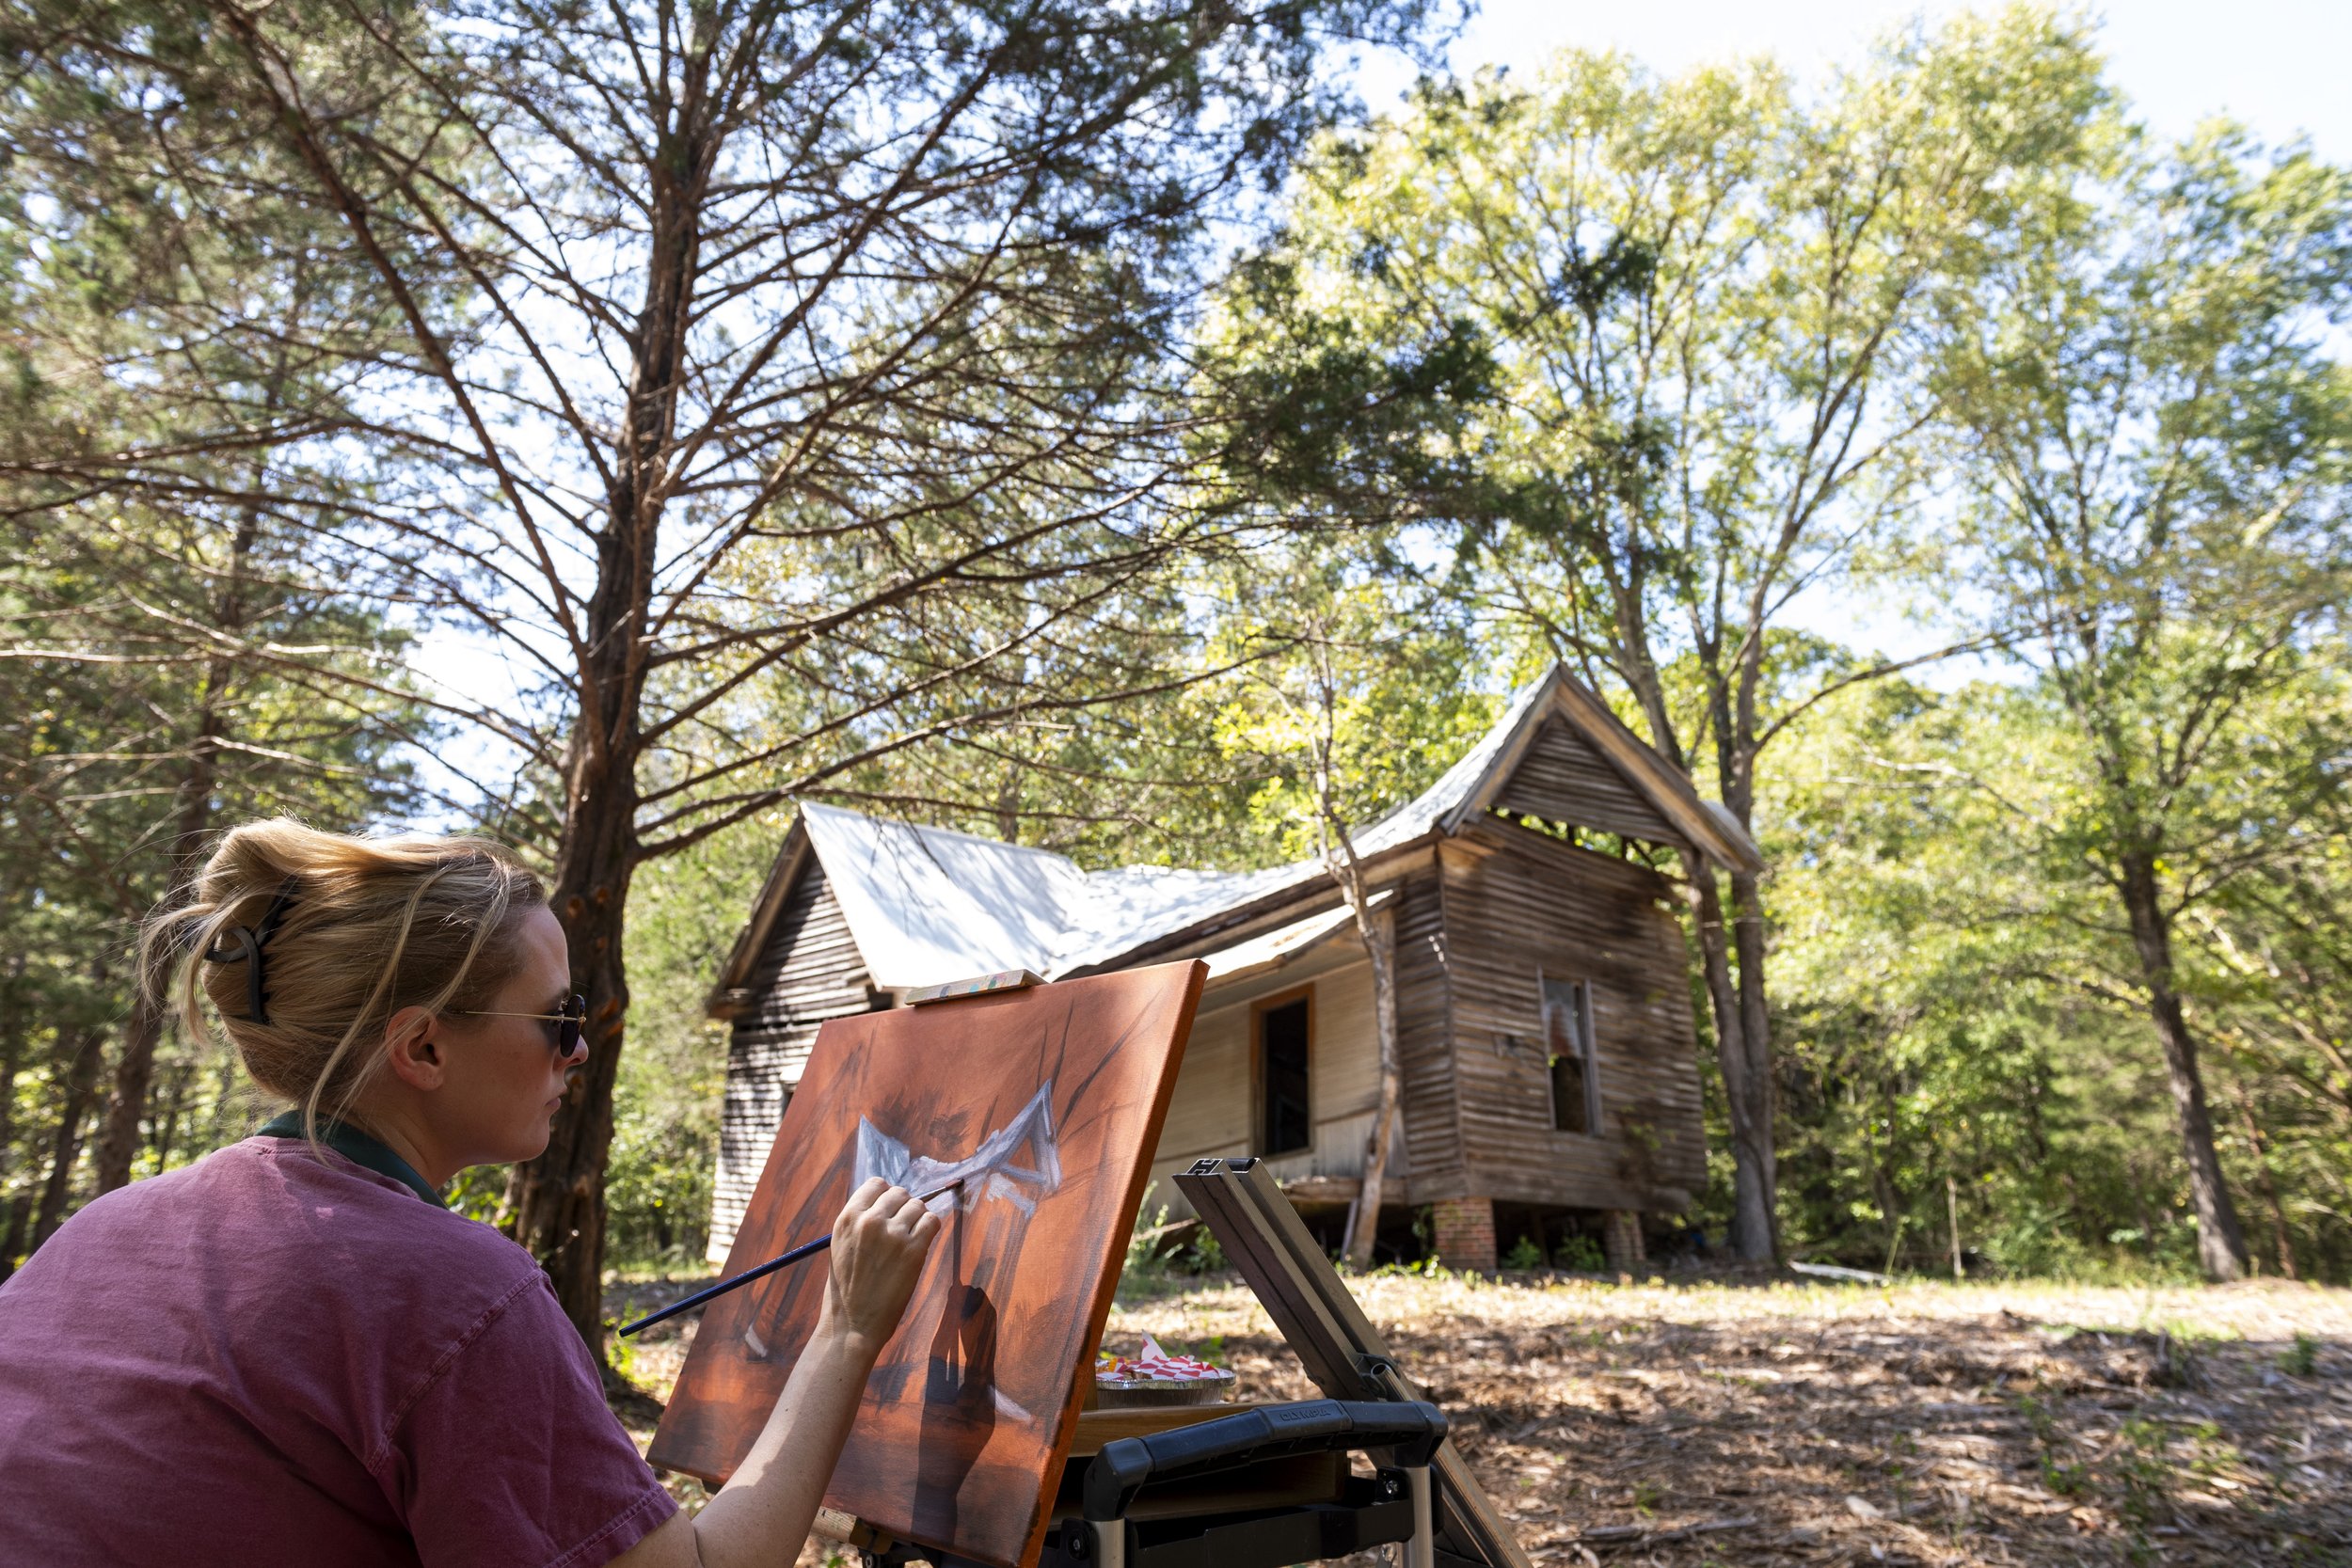  Nine Mississippi artists participate in Plein Air Painting Competition at Greenfield Farm on Sept. 17, 2023. Hannah McCormick, a graduate of the University of Mississippi who paints and teaches in Water Valley. Photo by Srijita Chattopadhyay/ Ole Mi